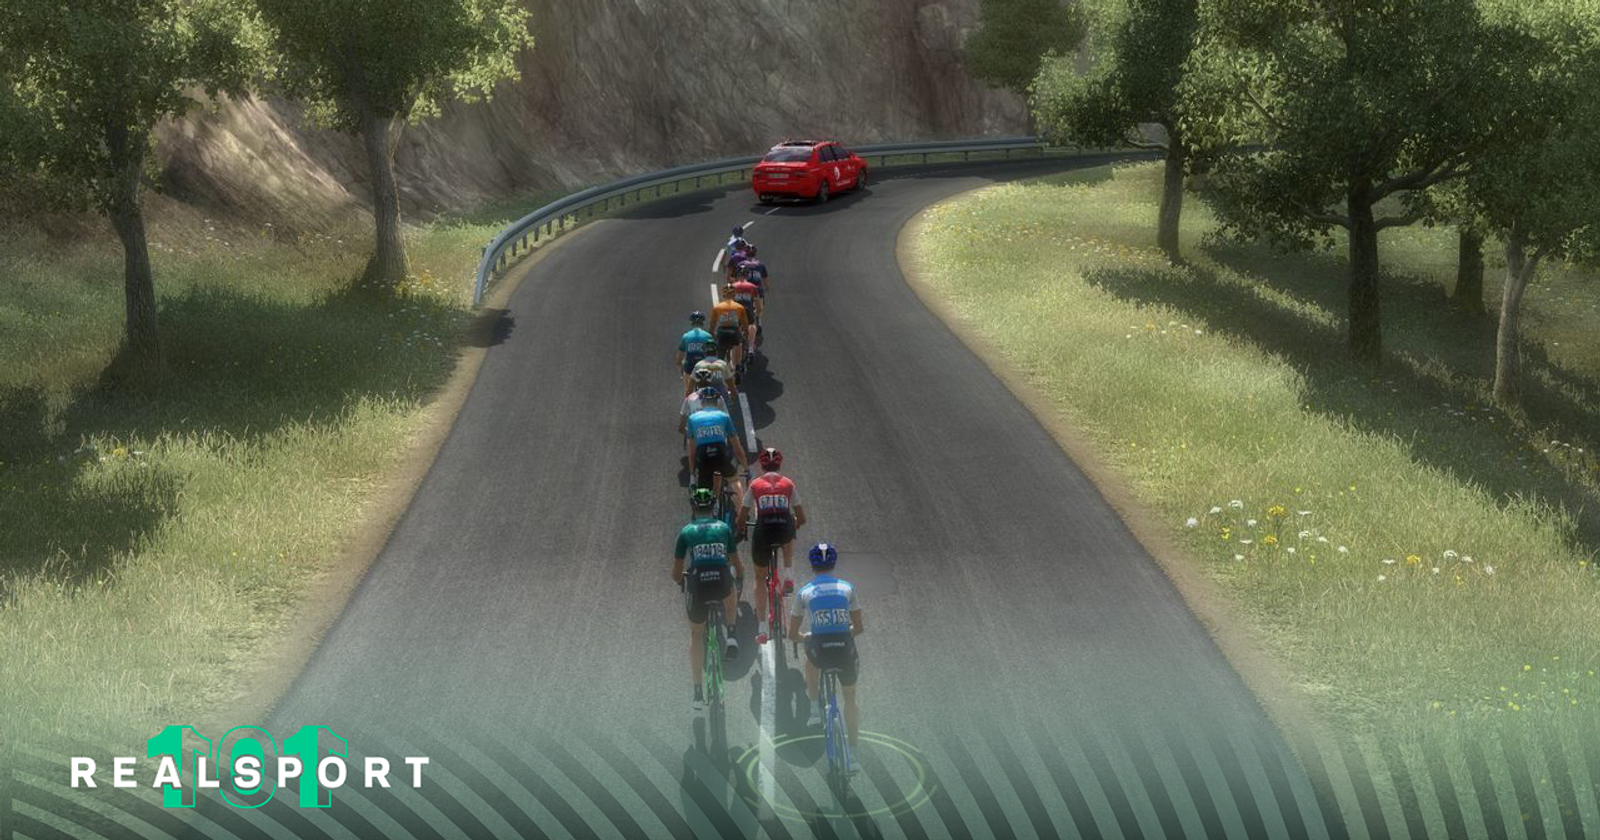 Pro Cycling Manager 2020 Trailer 